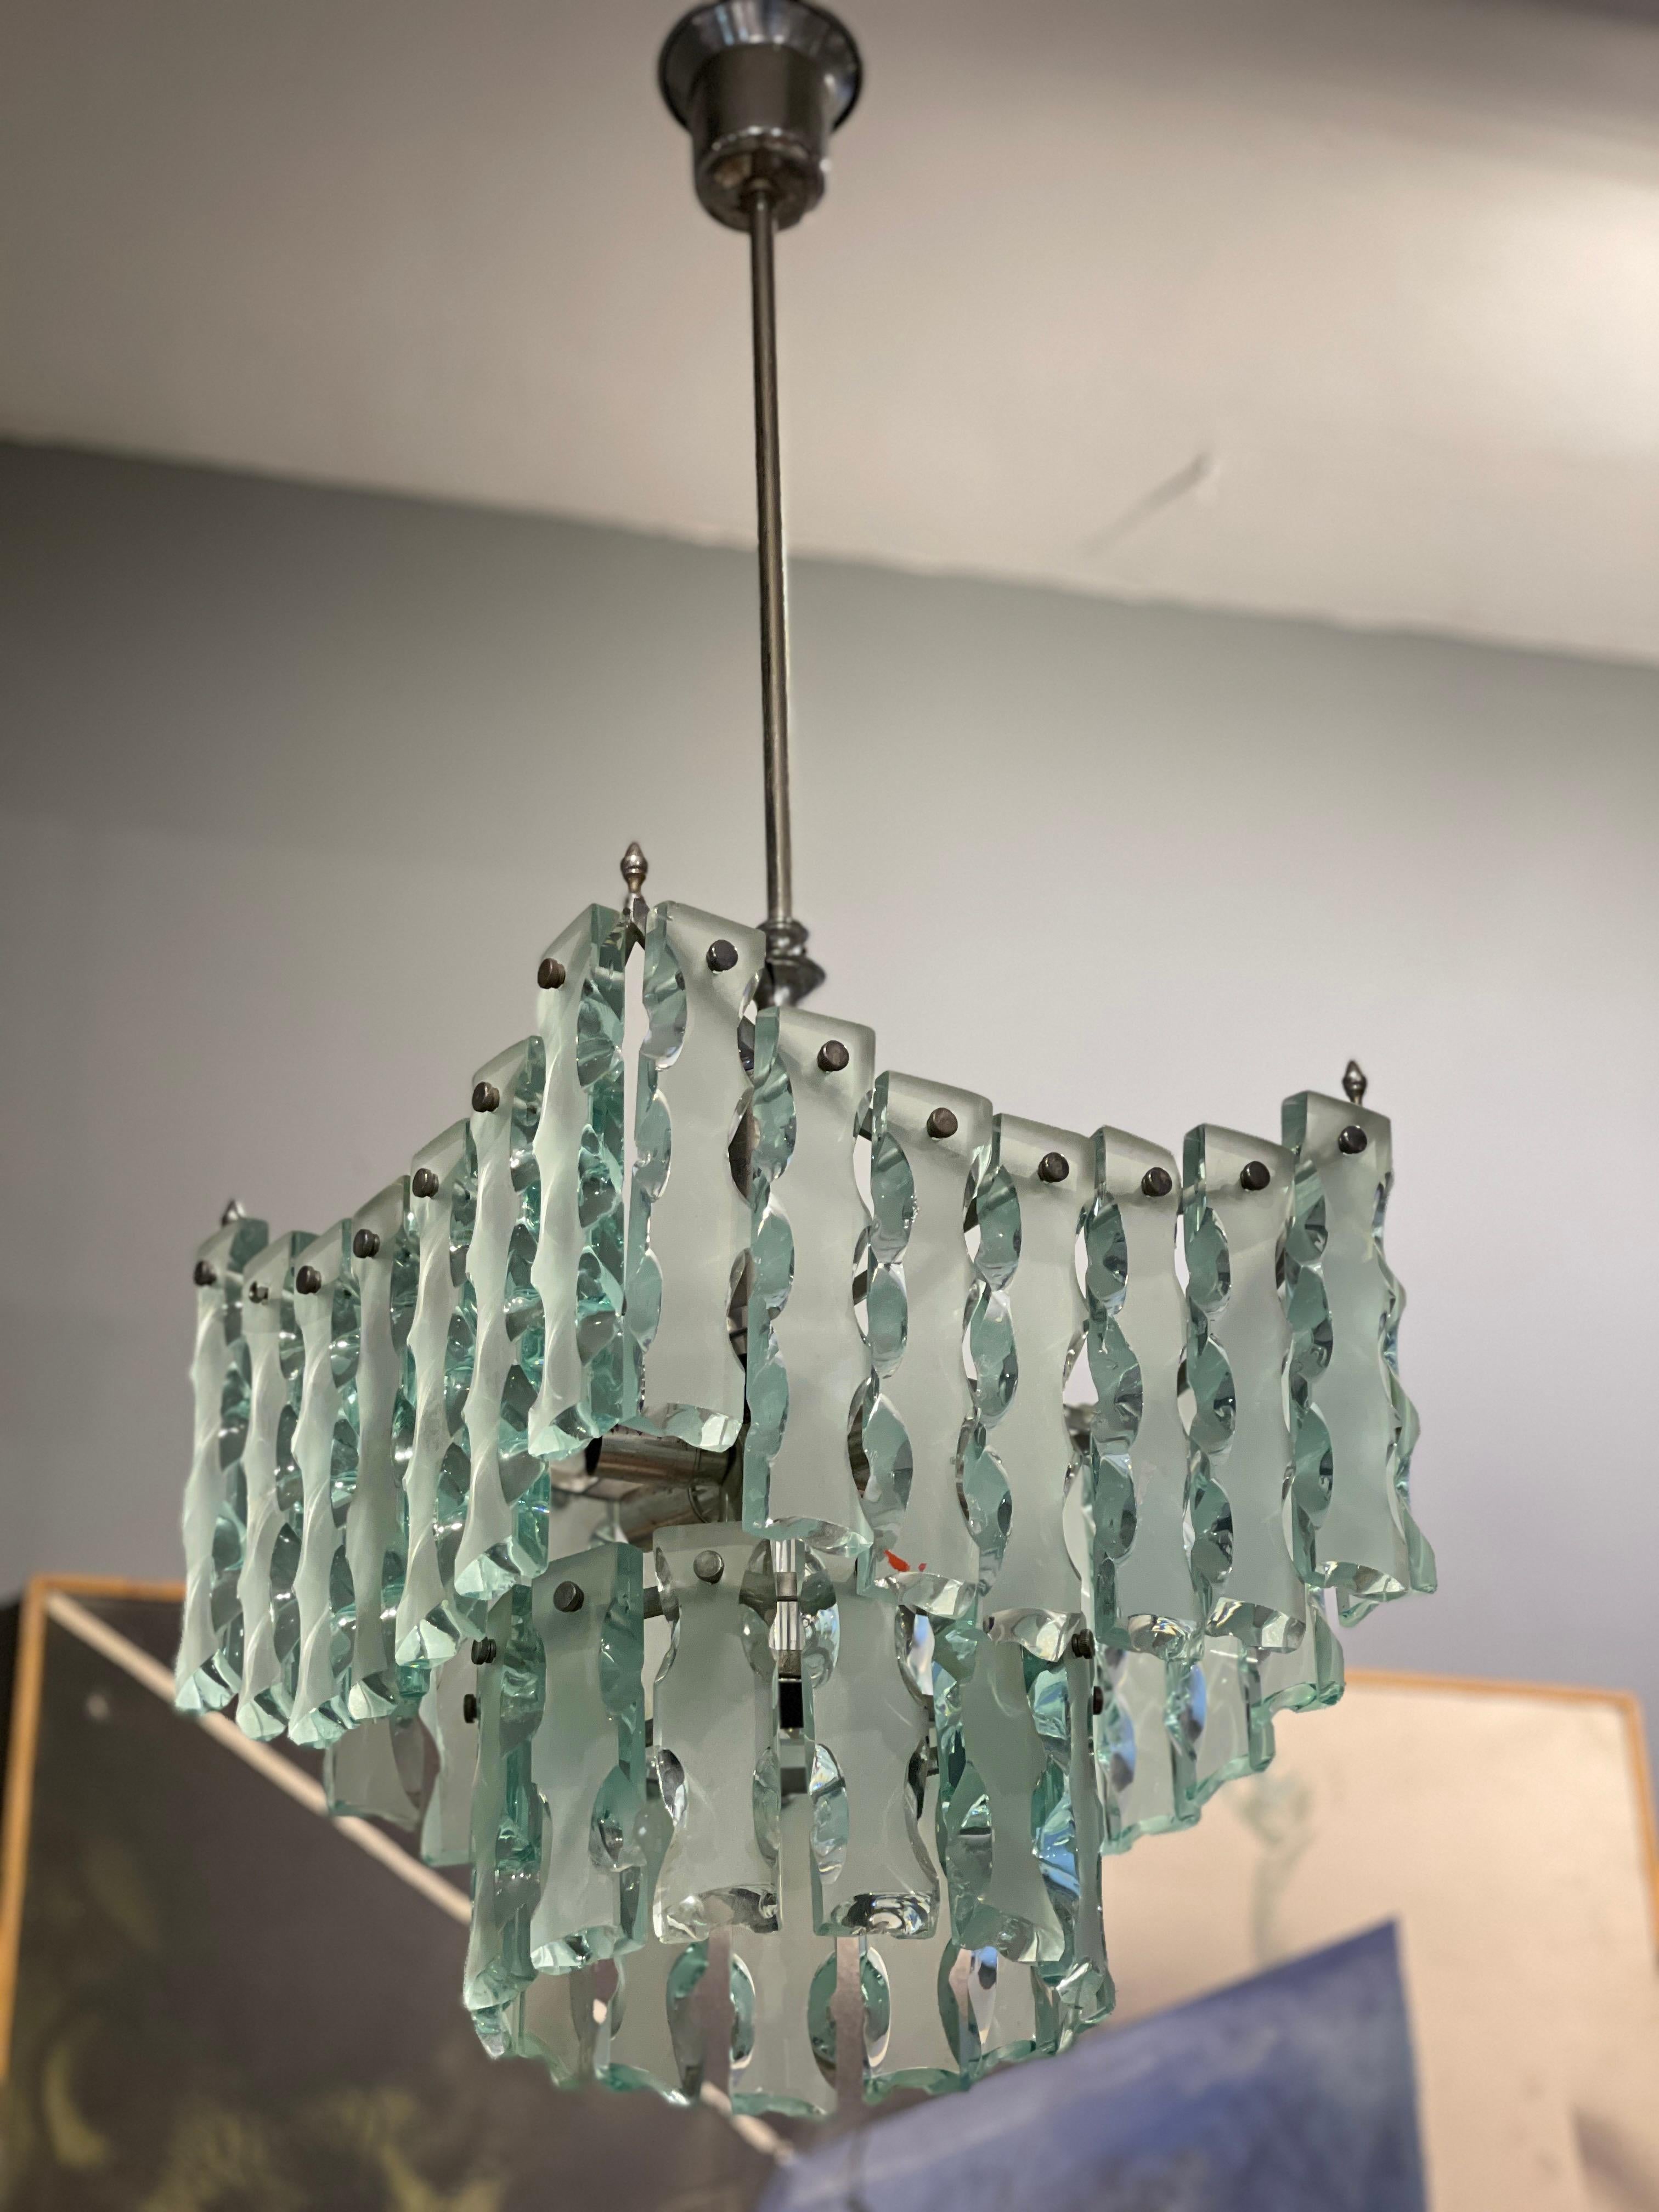 Hammered glass chandelier, Italian production from the 1960s by the Milanese company Zero Quattro.